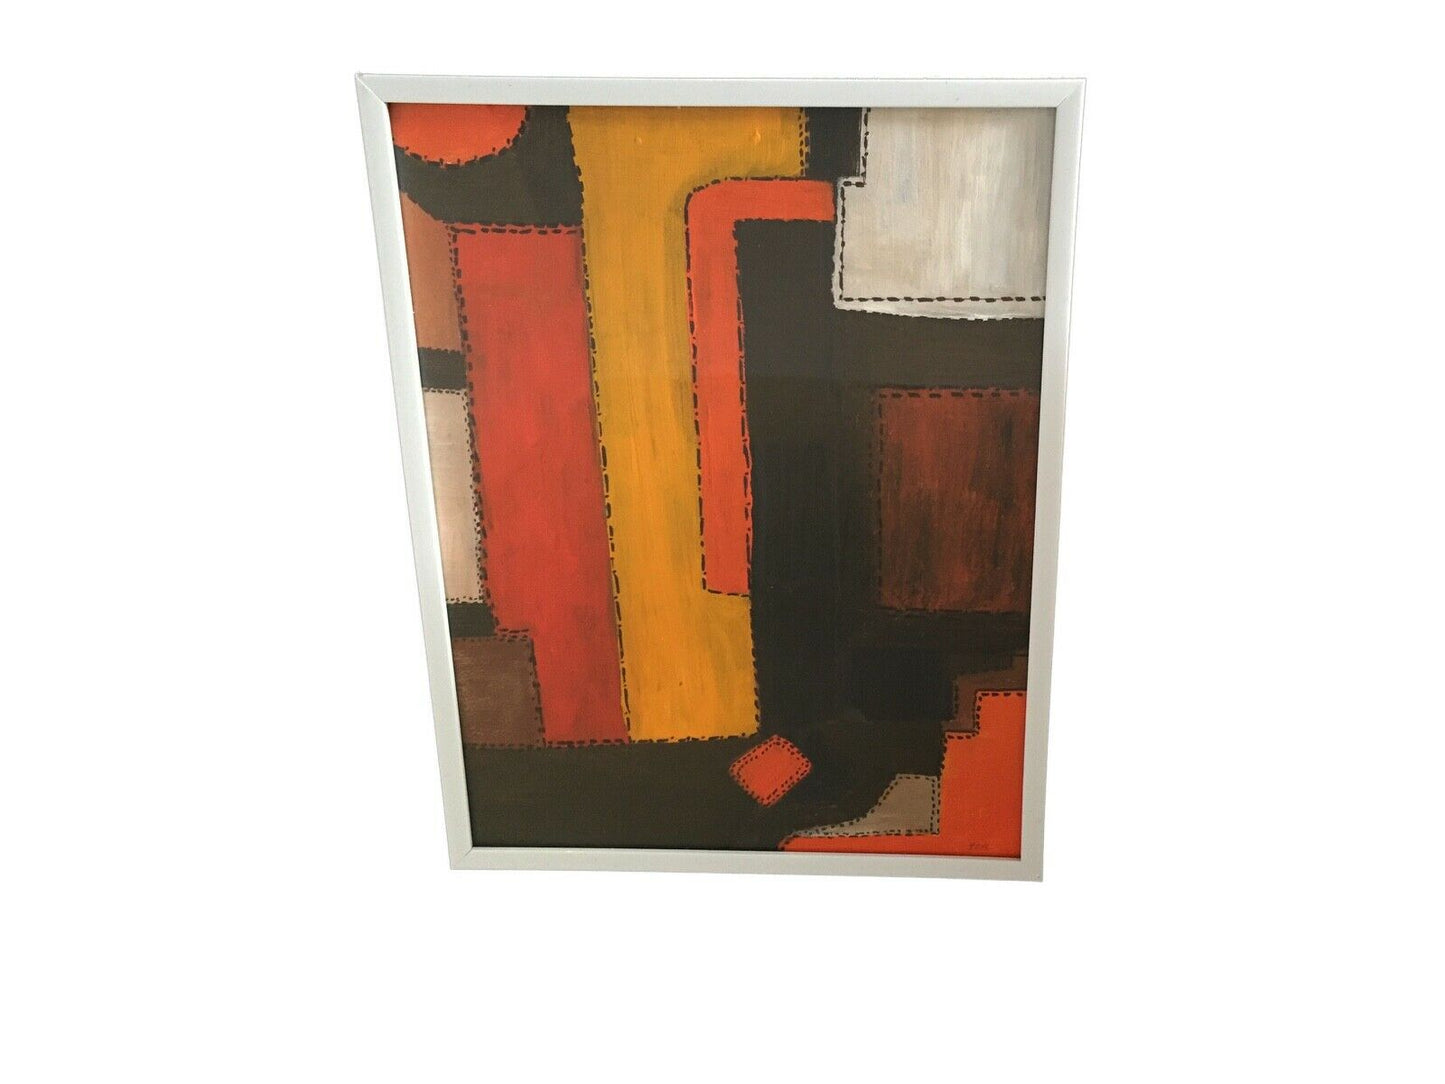 Acrylic on Paper Framed Abstract 11.5" by 9" #2003